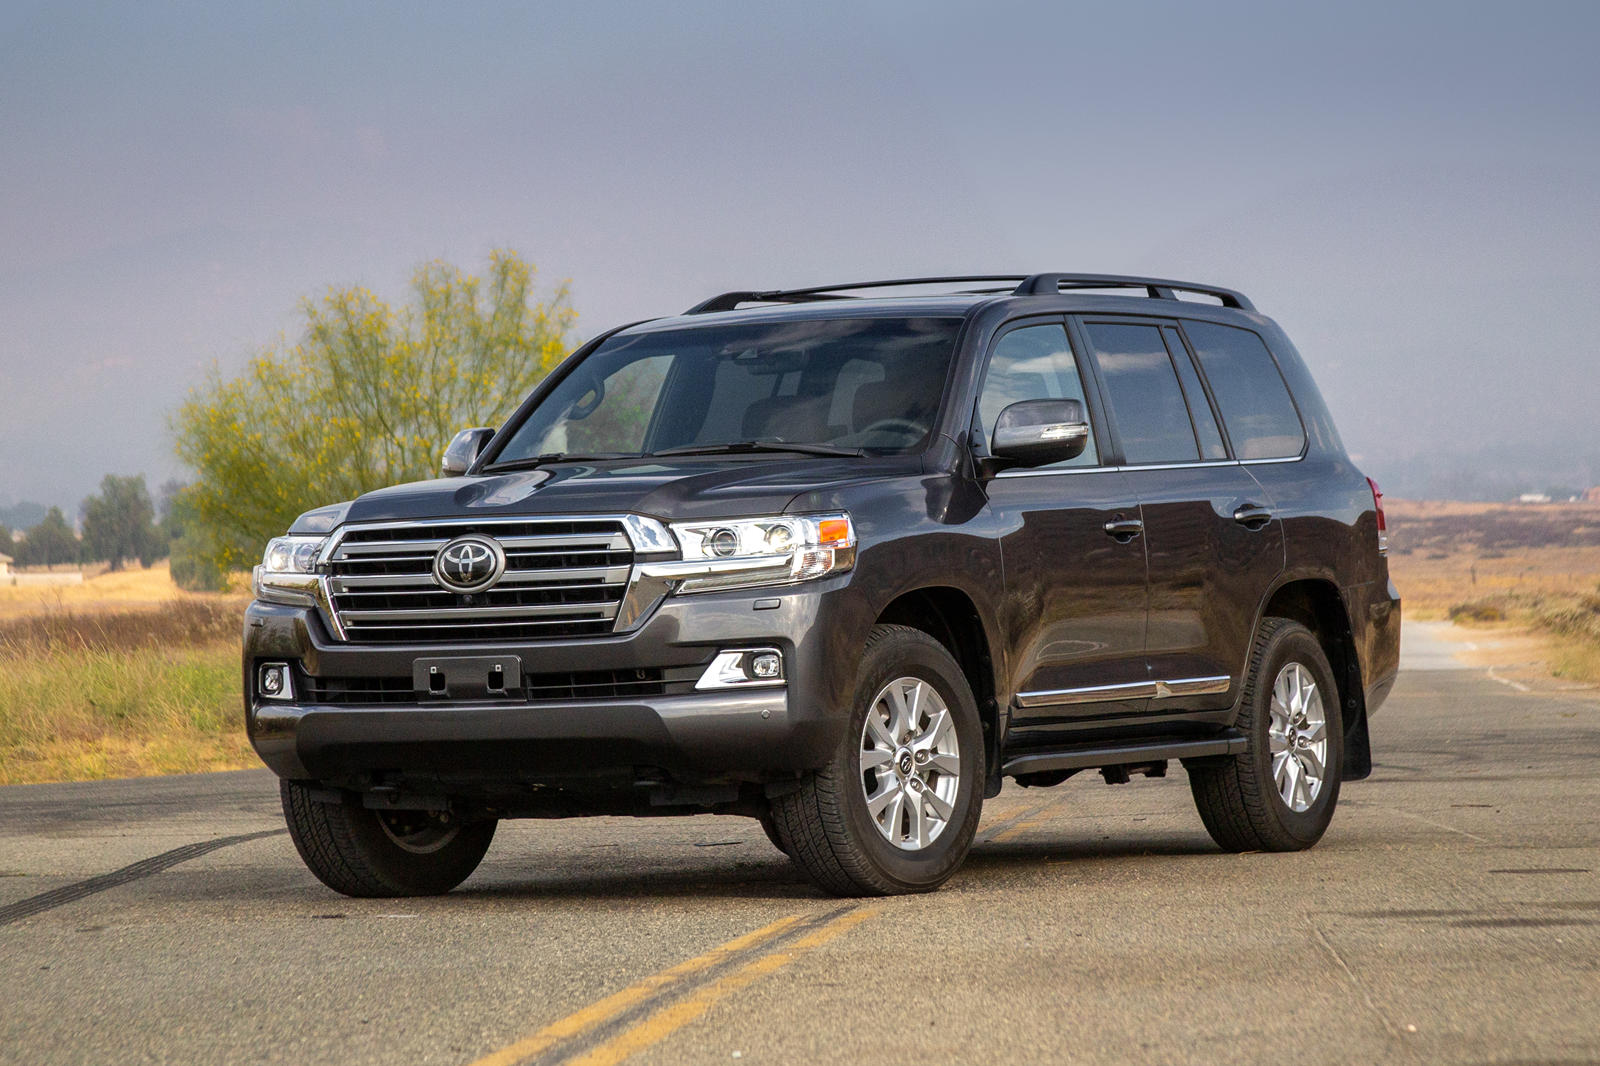 2021 Toyota Land Cruiser Review, Pricing | Land Cruiser SUV Models | CarBuzz